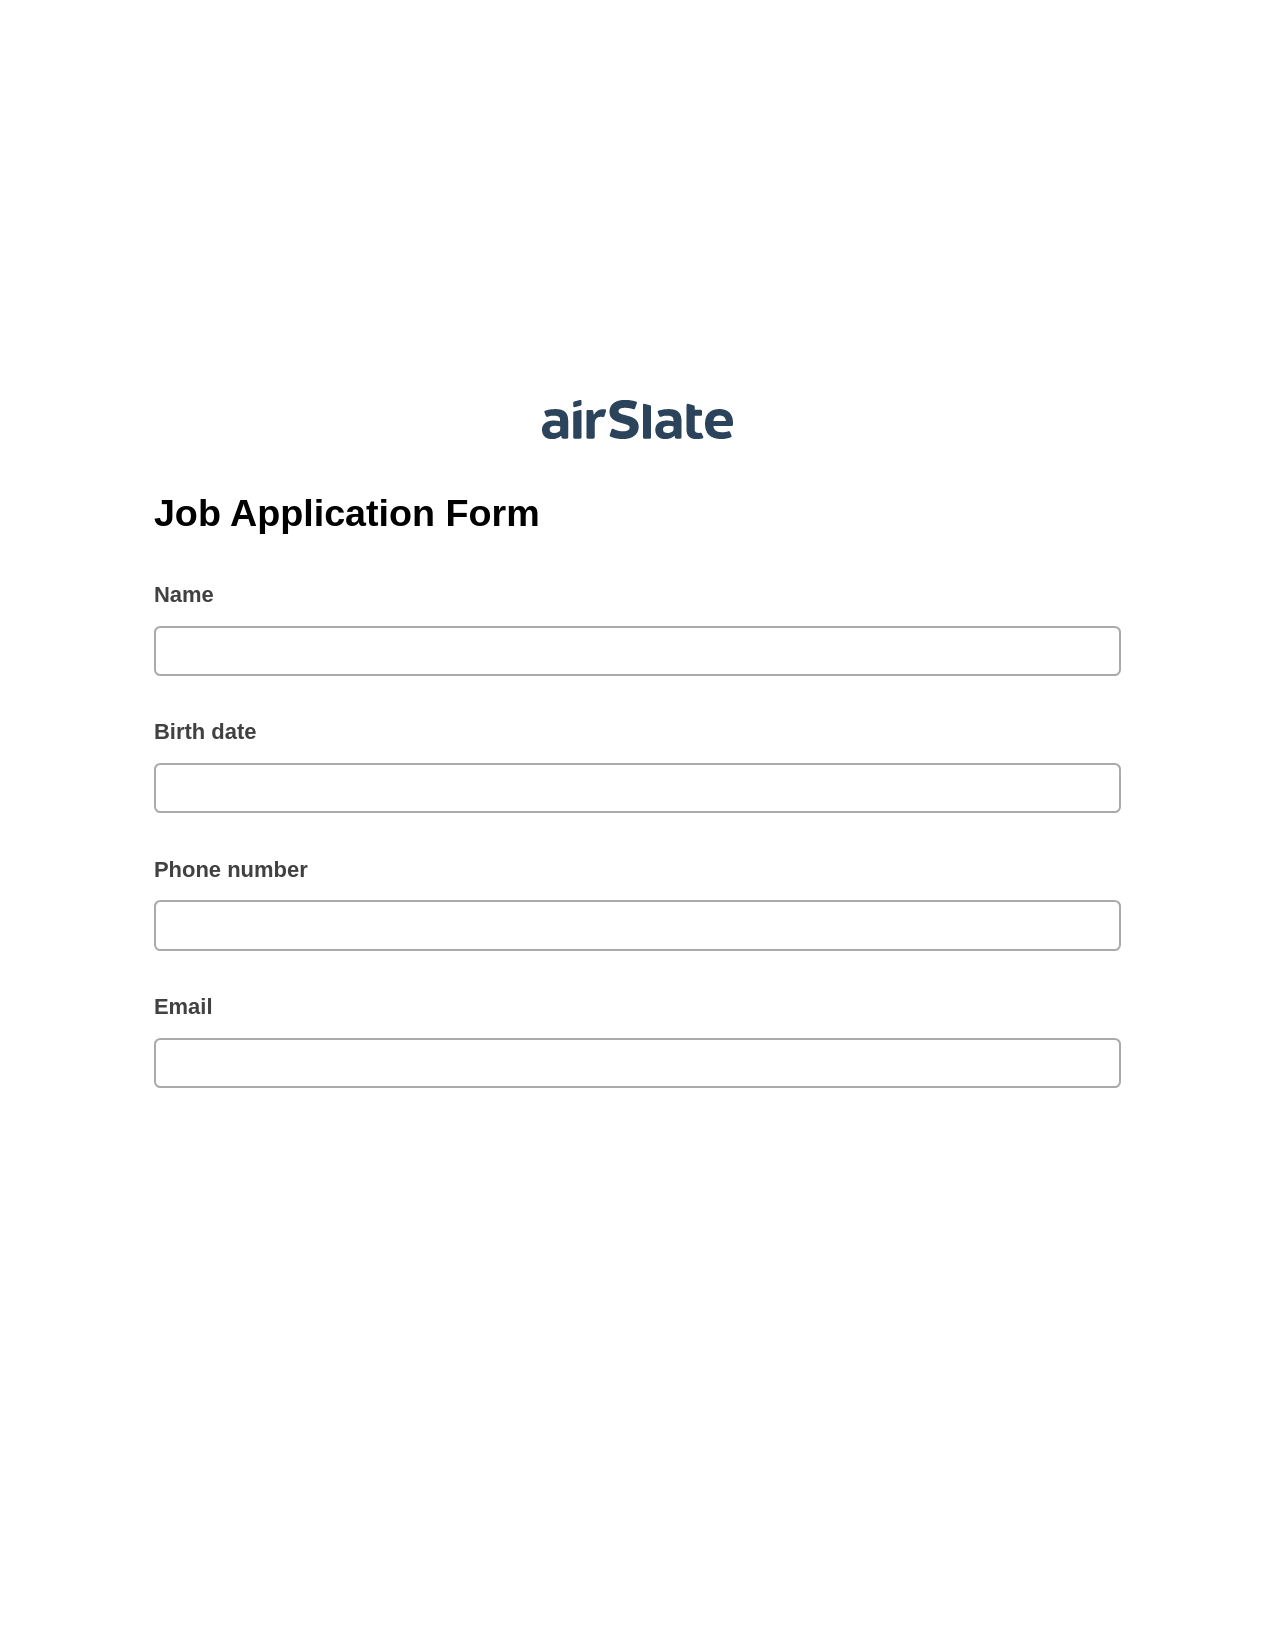 Job Application Form Pre-fill from Google Sheets Bot, Audit Trail Bot, Email Notification Postfinish Bot